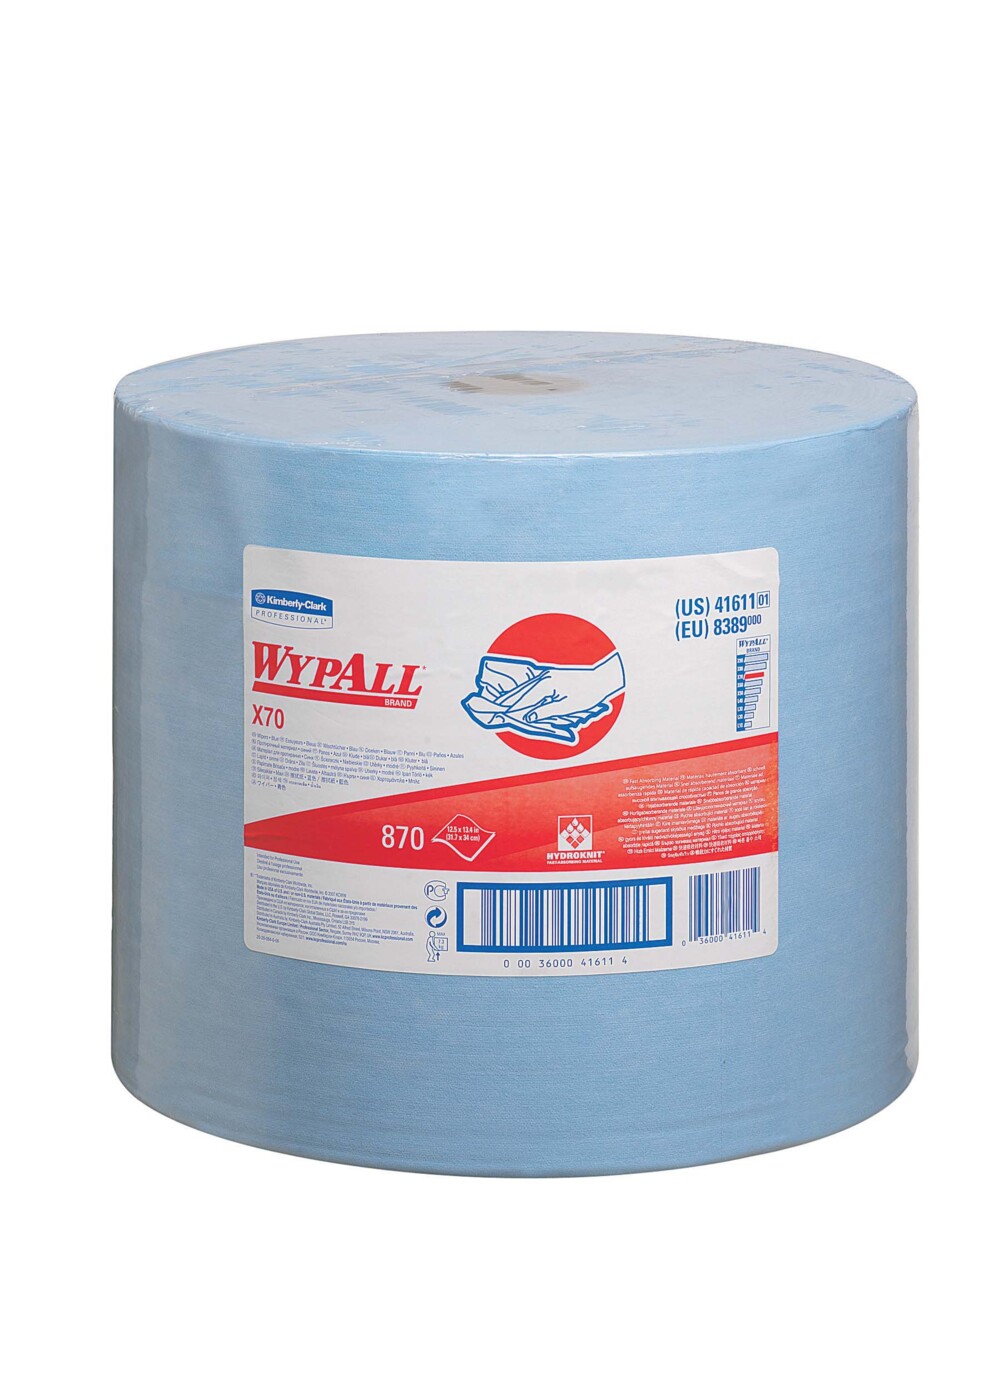 WypAll® X70 Cloths 8389 - 1 large roll x 870 blue, 1 ply cloths - 8389